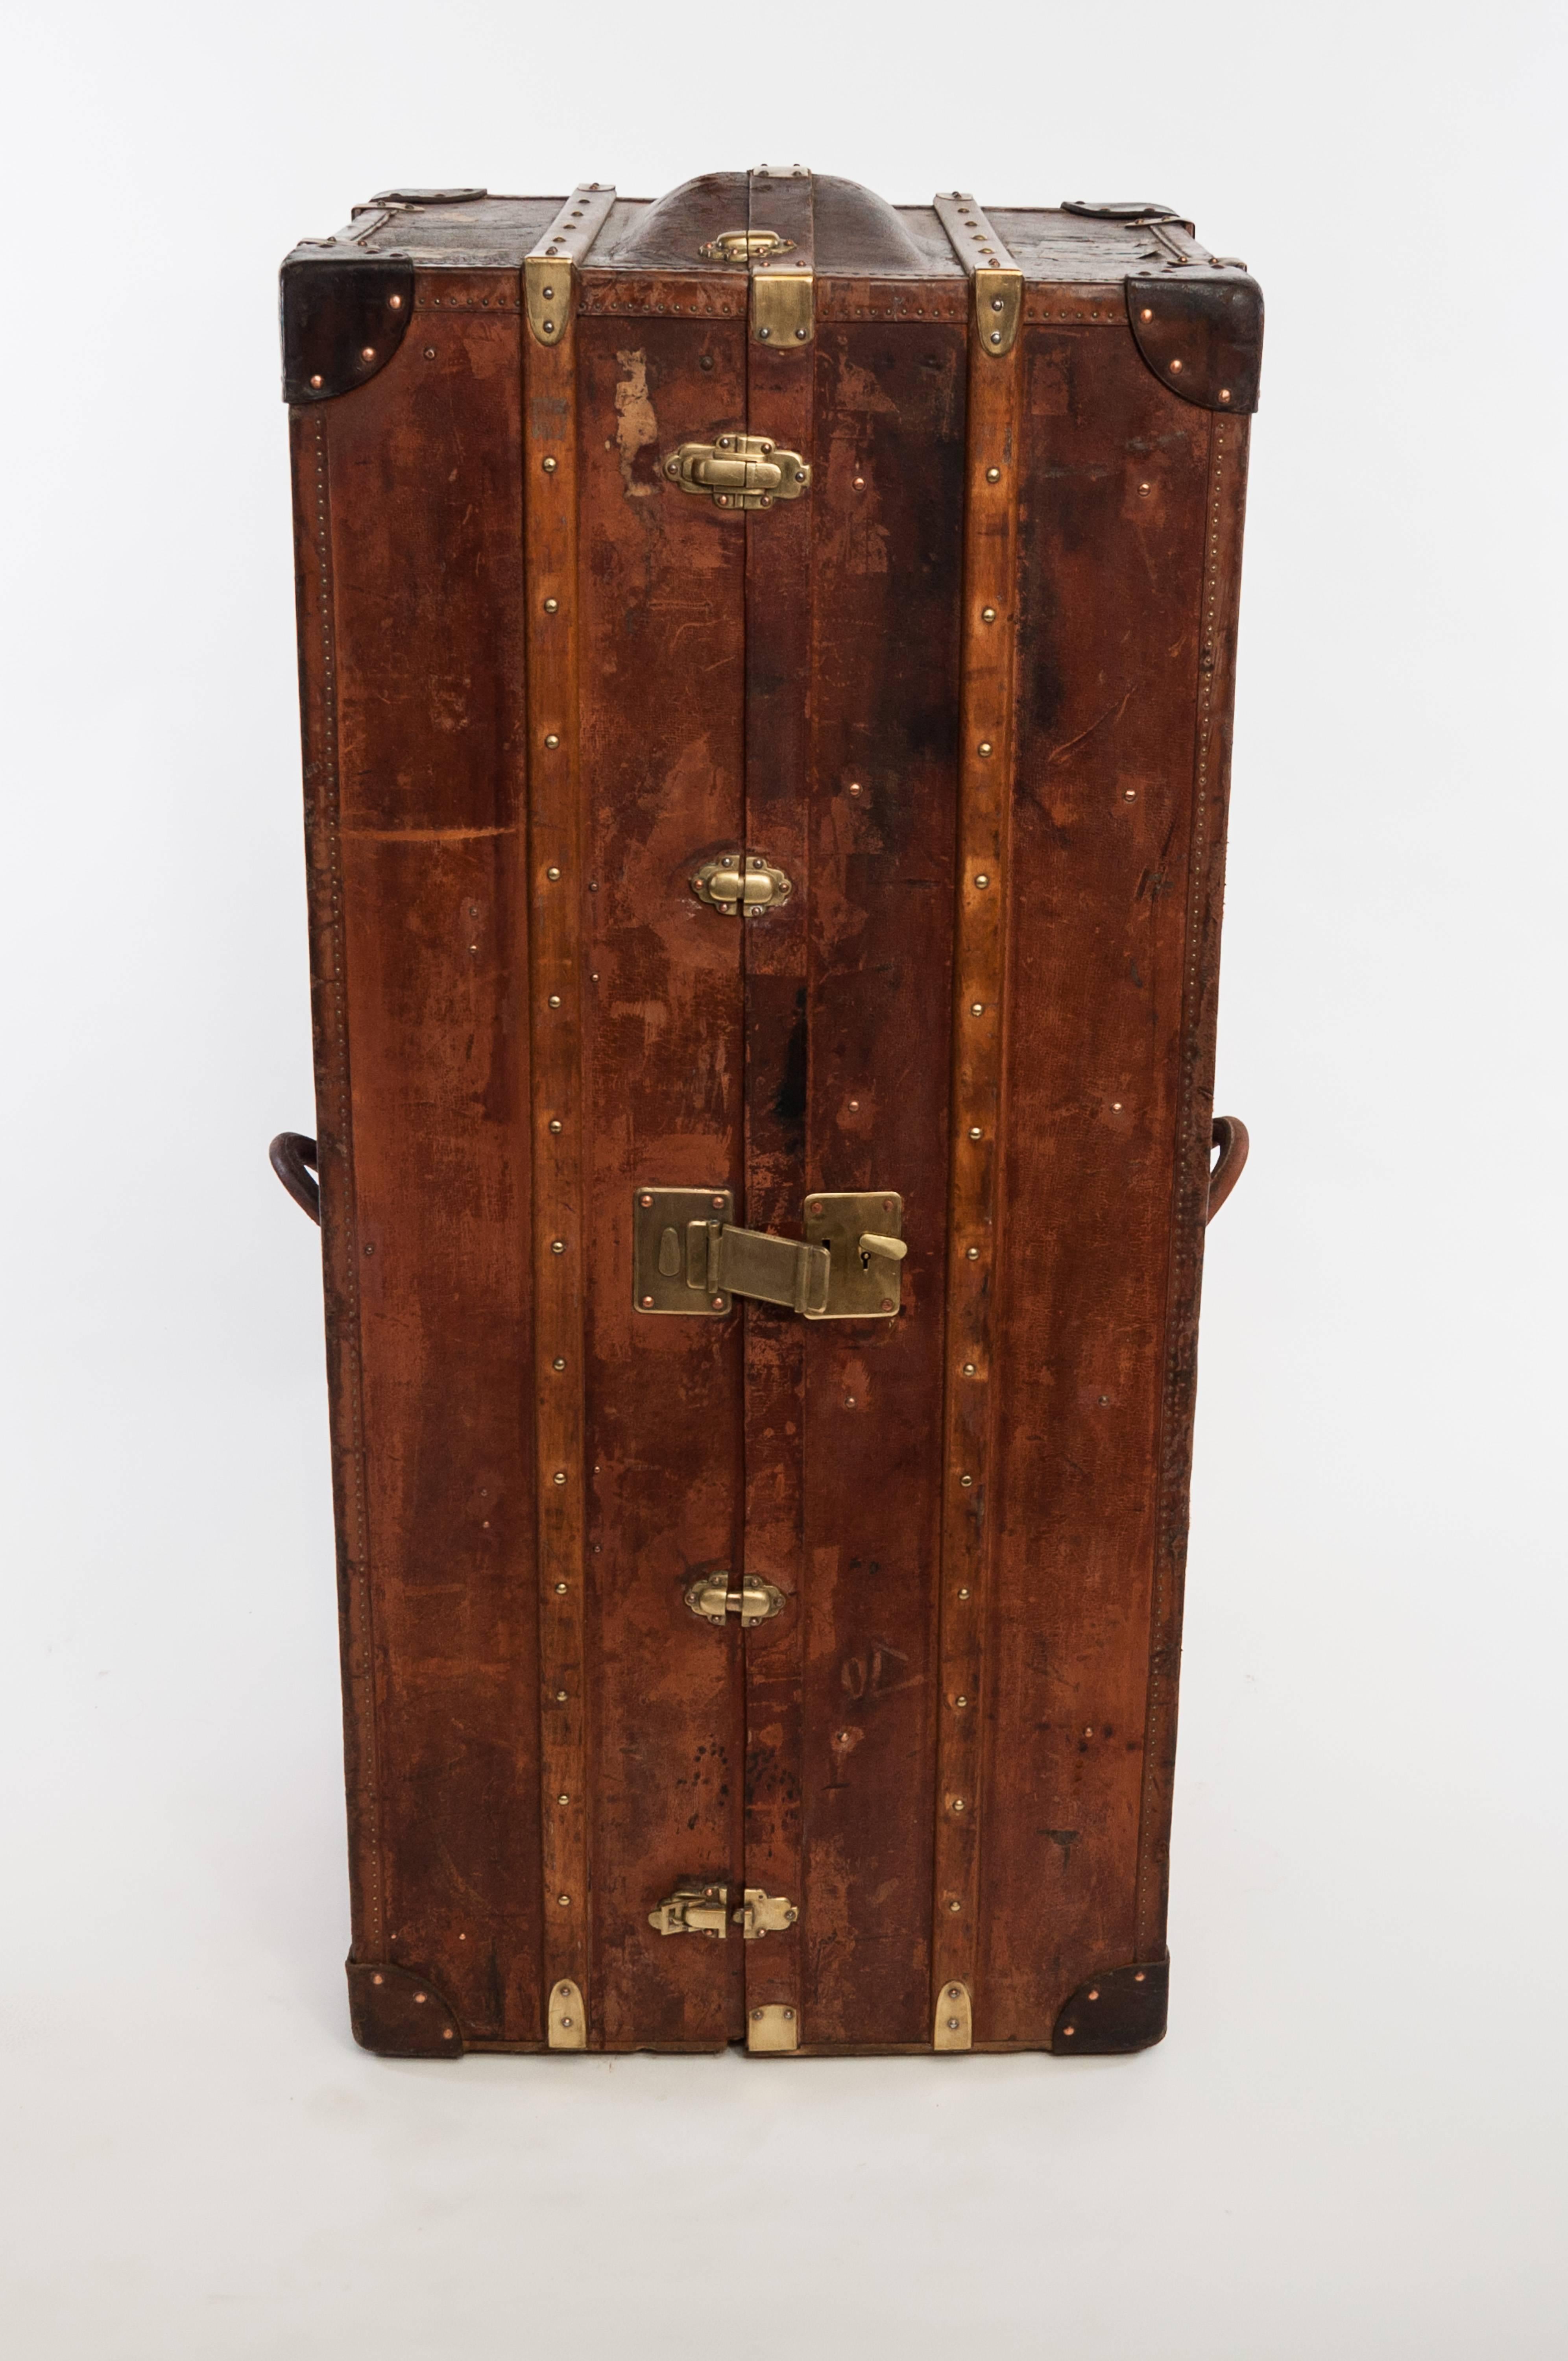 A very elegant and hard to find wardrobe steamer trunk in wonderful brown leather.
This custom-made item is attributed to Nigst & Sohn K&K Erzherzöglicher Kammerlieferant and is a custom-made individual order. 

On one side there are four fitted